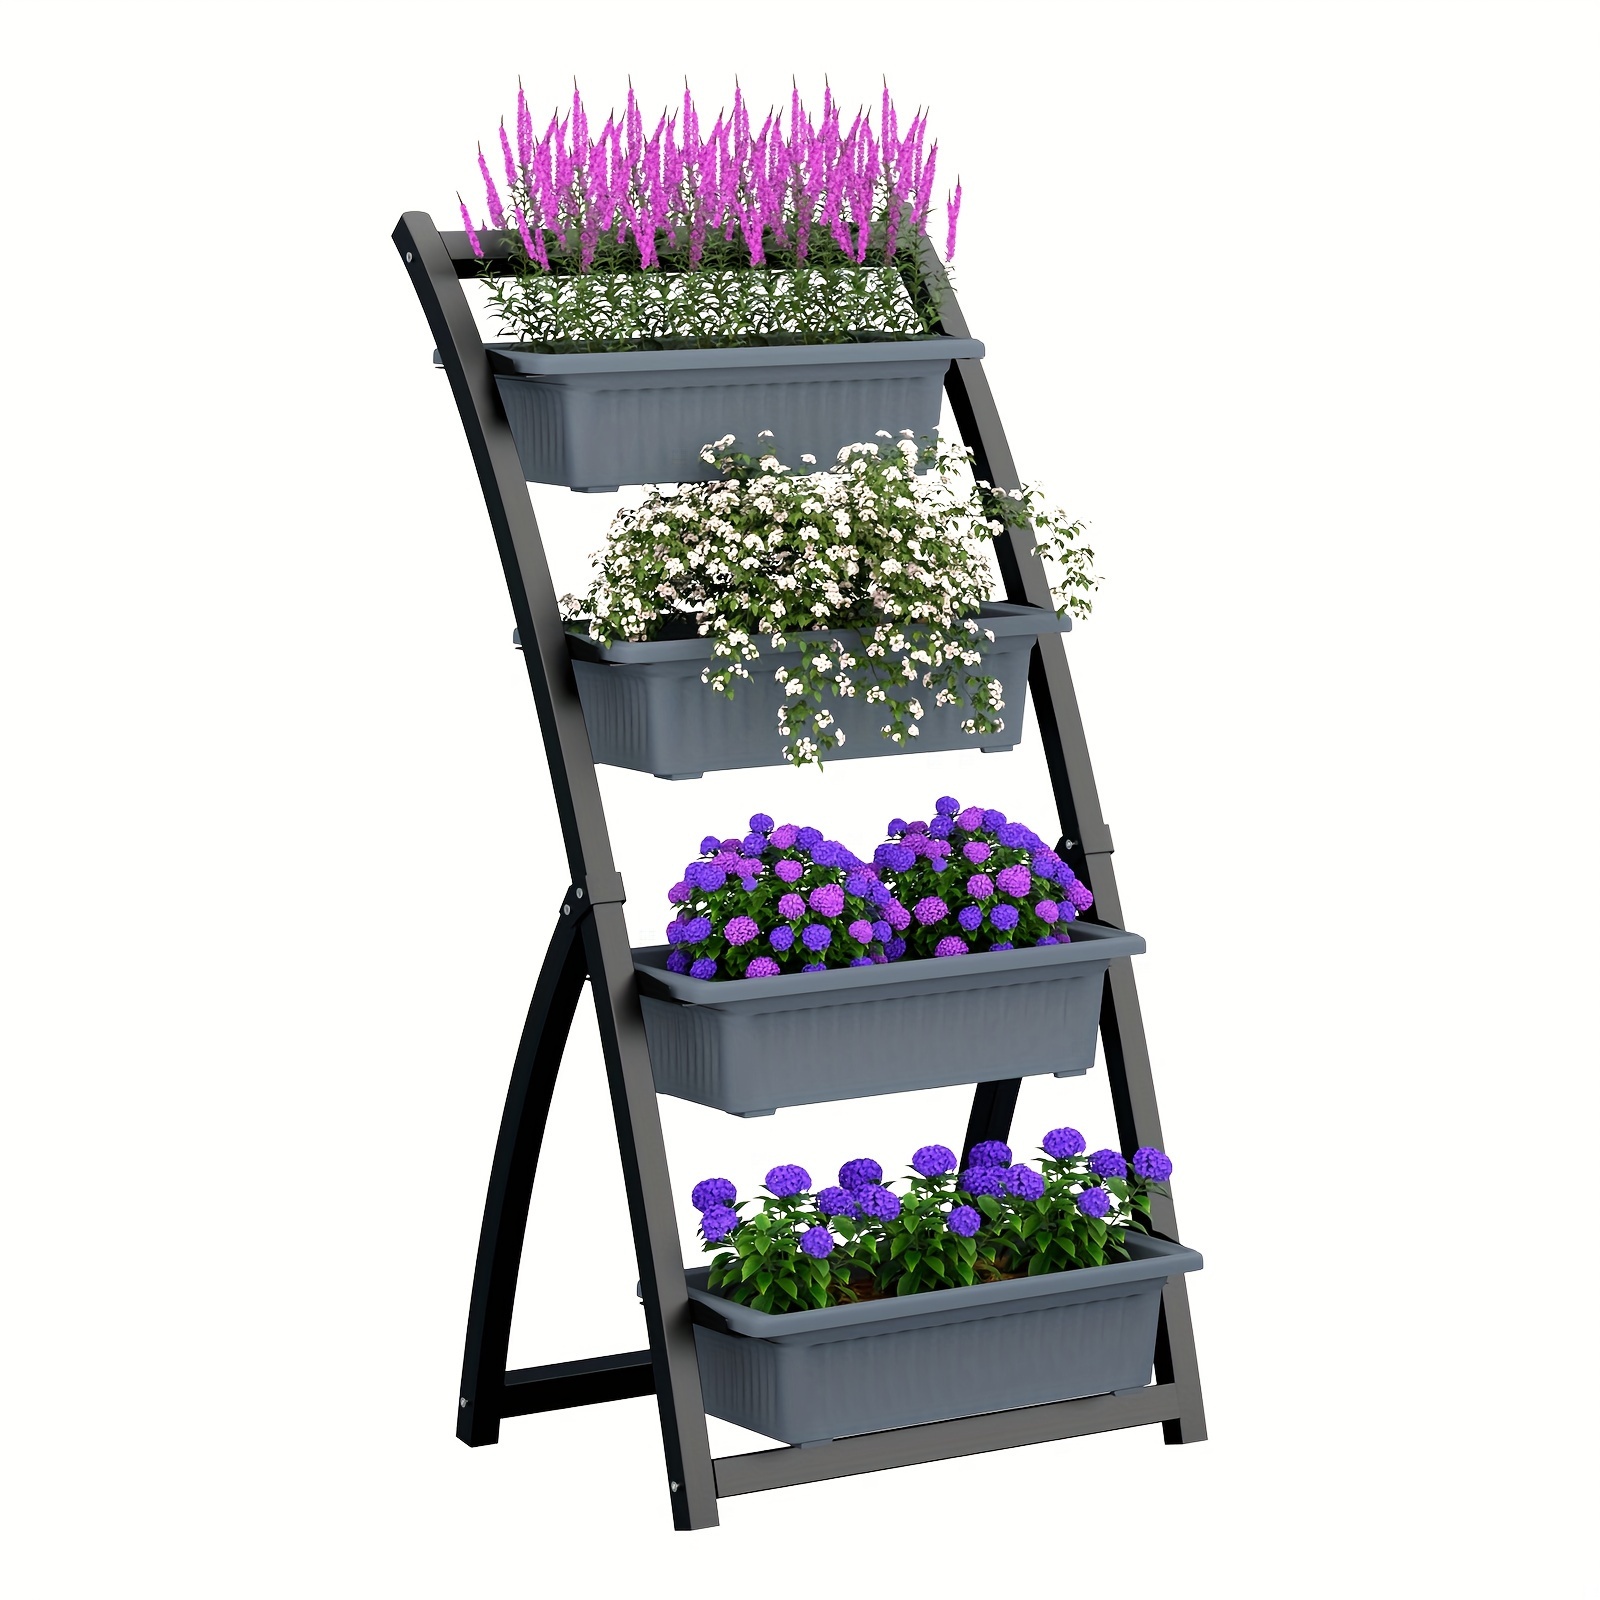 

4-ft Vertical Raised Garden Bed - 4-tier Container Boxes Freestanding Raised Garden Pot - Suitable For Growing Plants And Flowers Indoors And Outdoors Or On Patios And Balconies